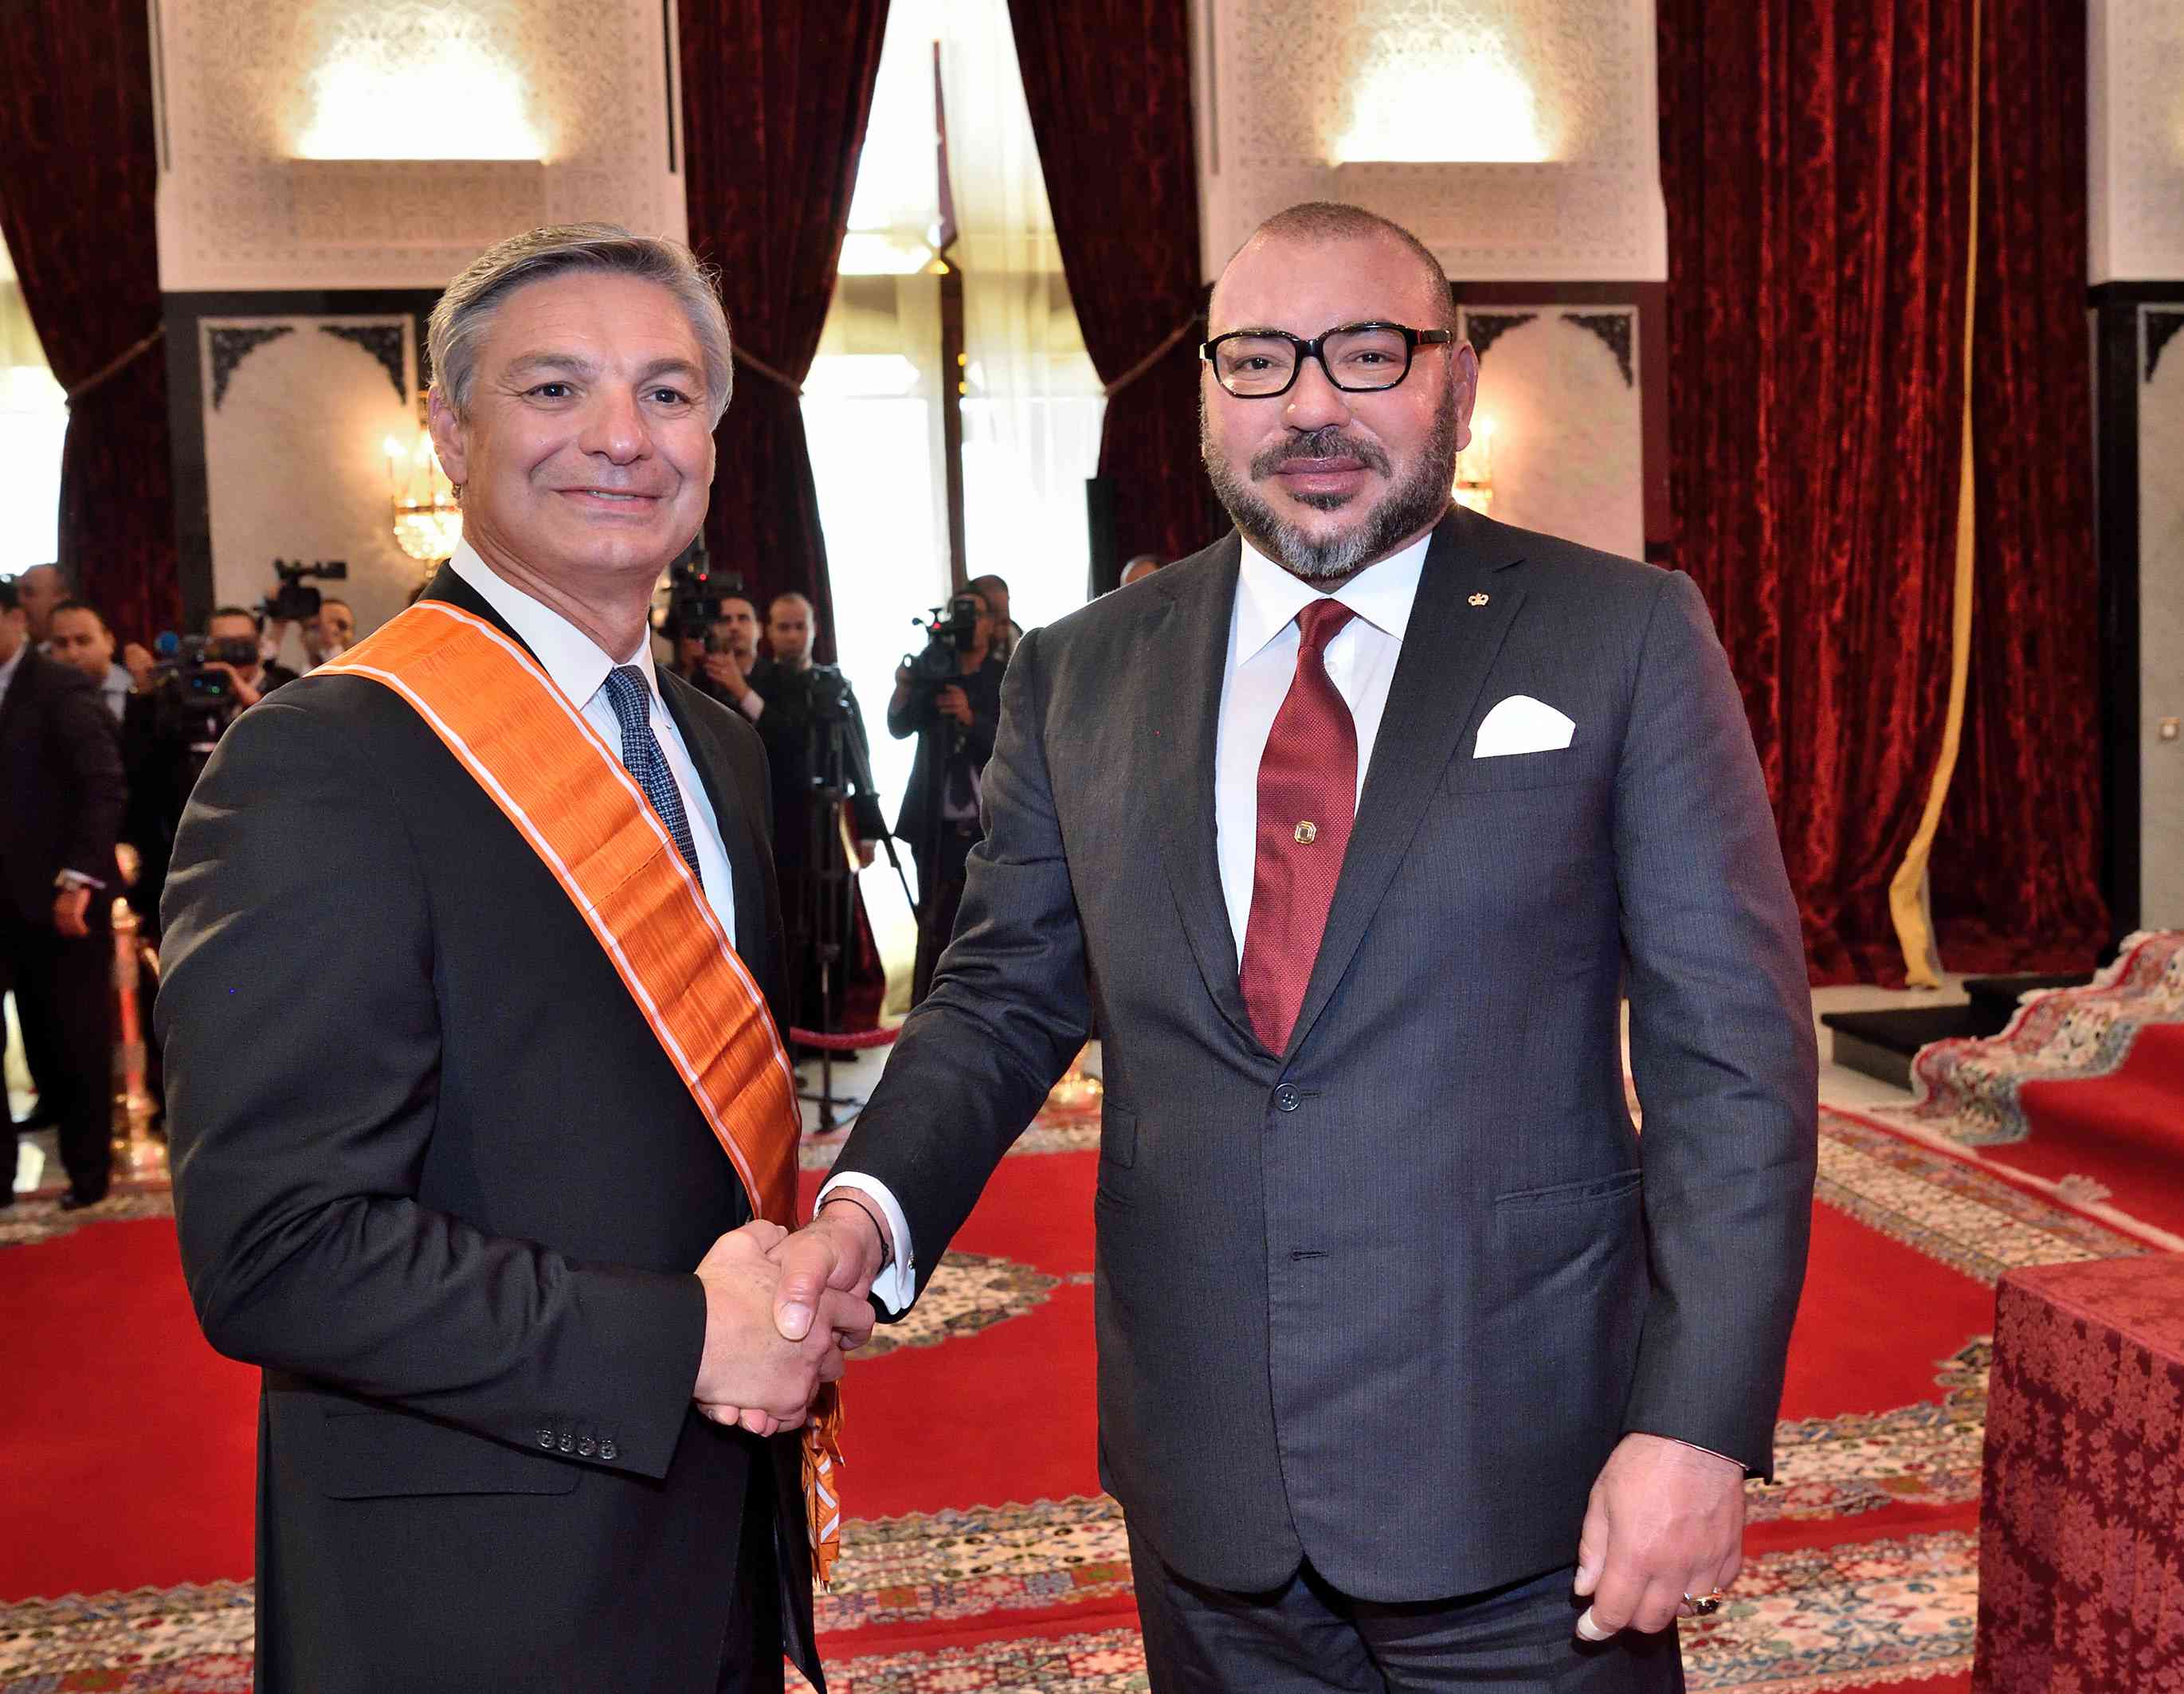 Morocco's King Mohammed VI (right) shakes hands with Raymond L. Conner, Vice Chairman of The Boeing Company and President and Chief Executive Officer of Boeing Commercial Airplanes, at a ceremony in Tangier, Morocco held September 27, 2016.